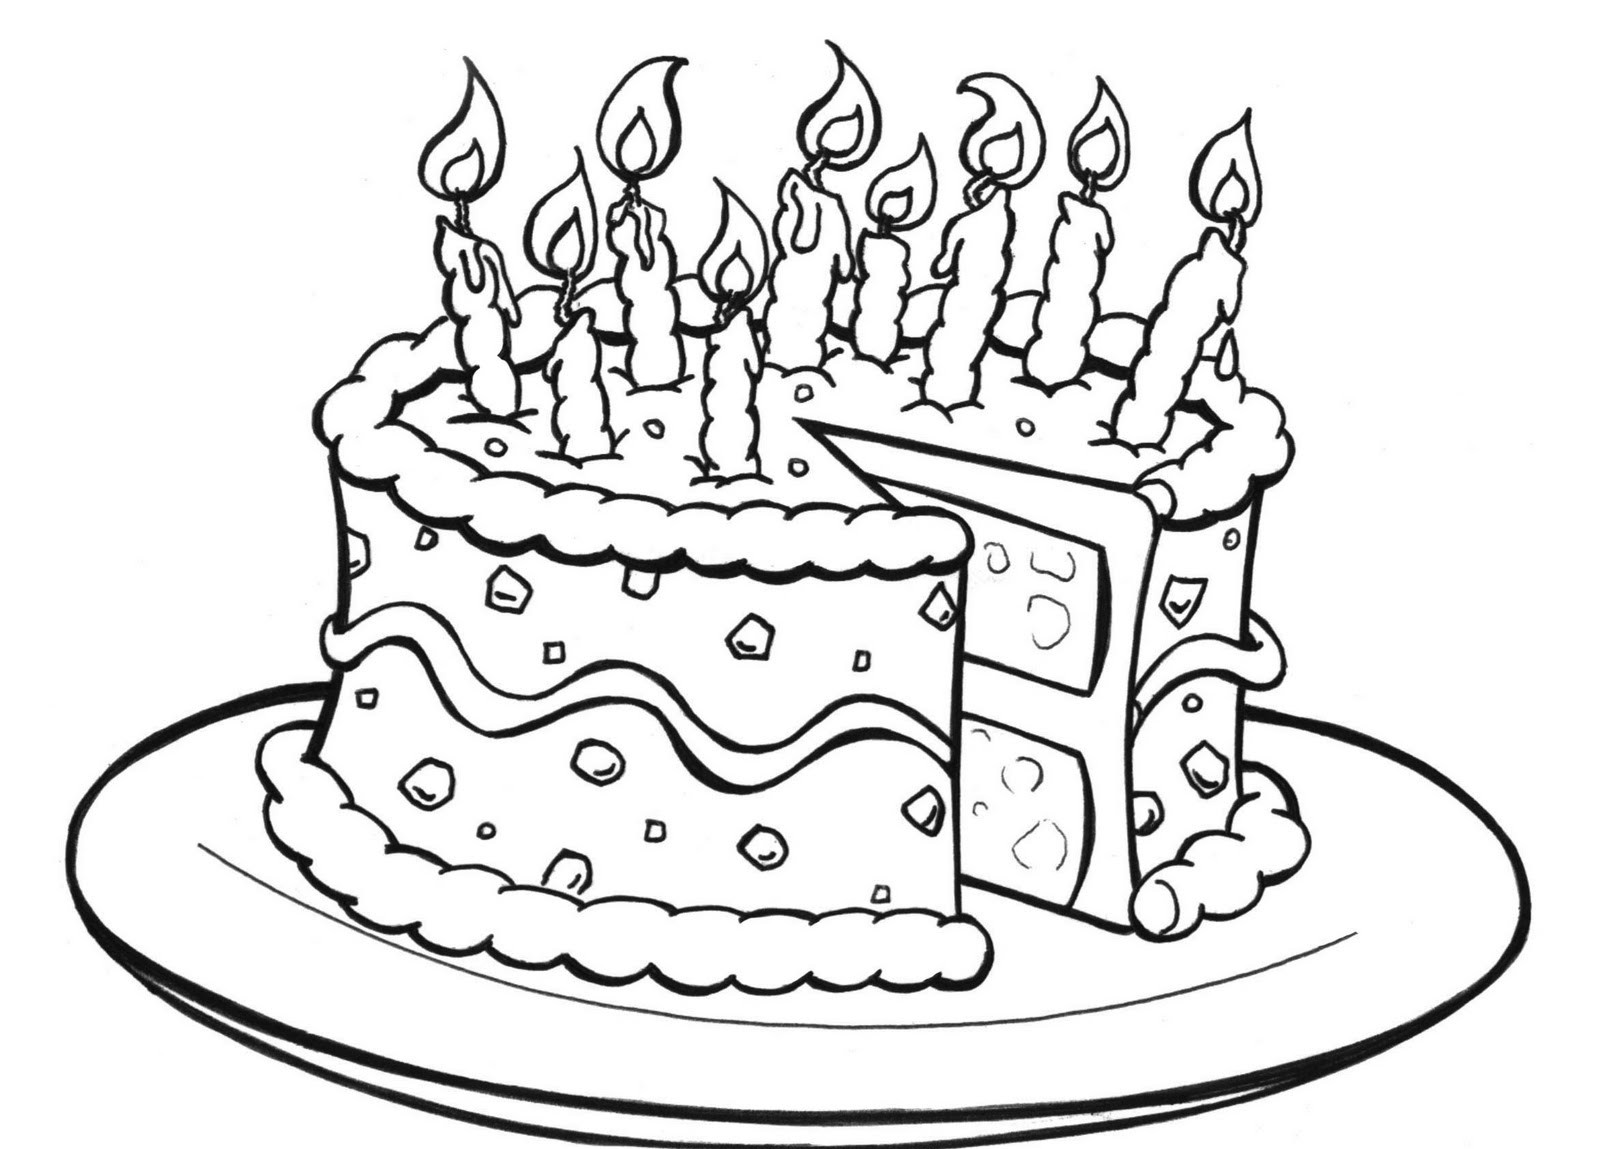 Cake Coloring Pages (100% Free Printables)